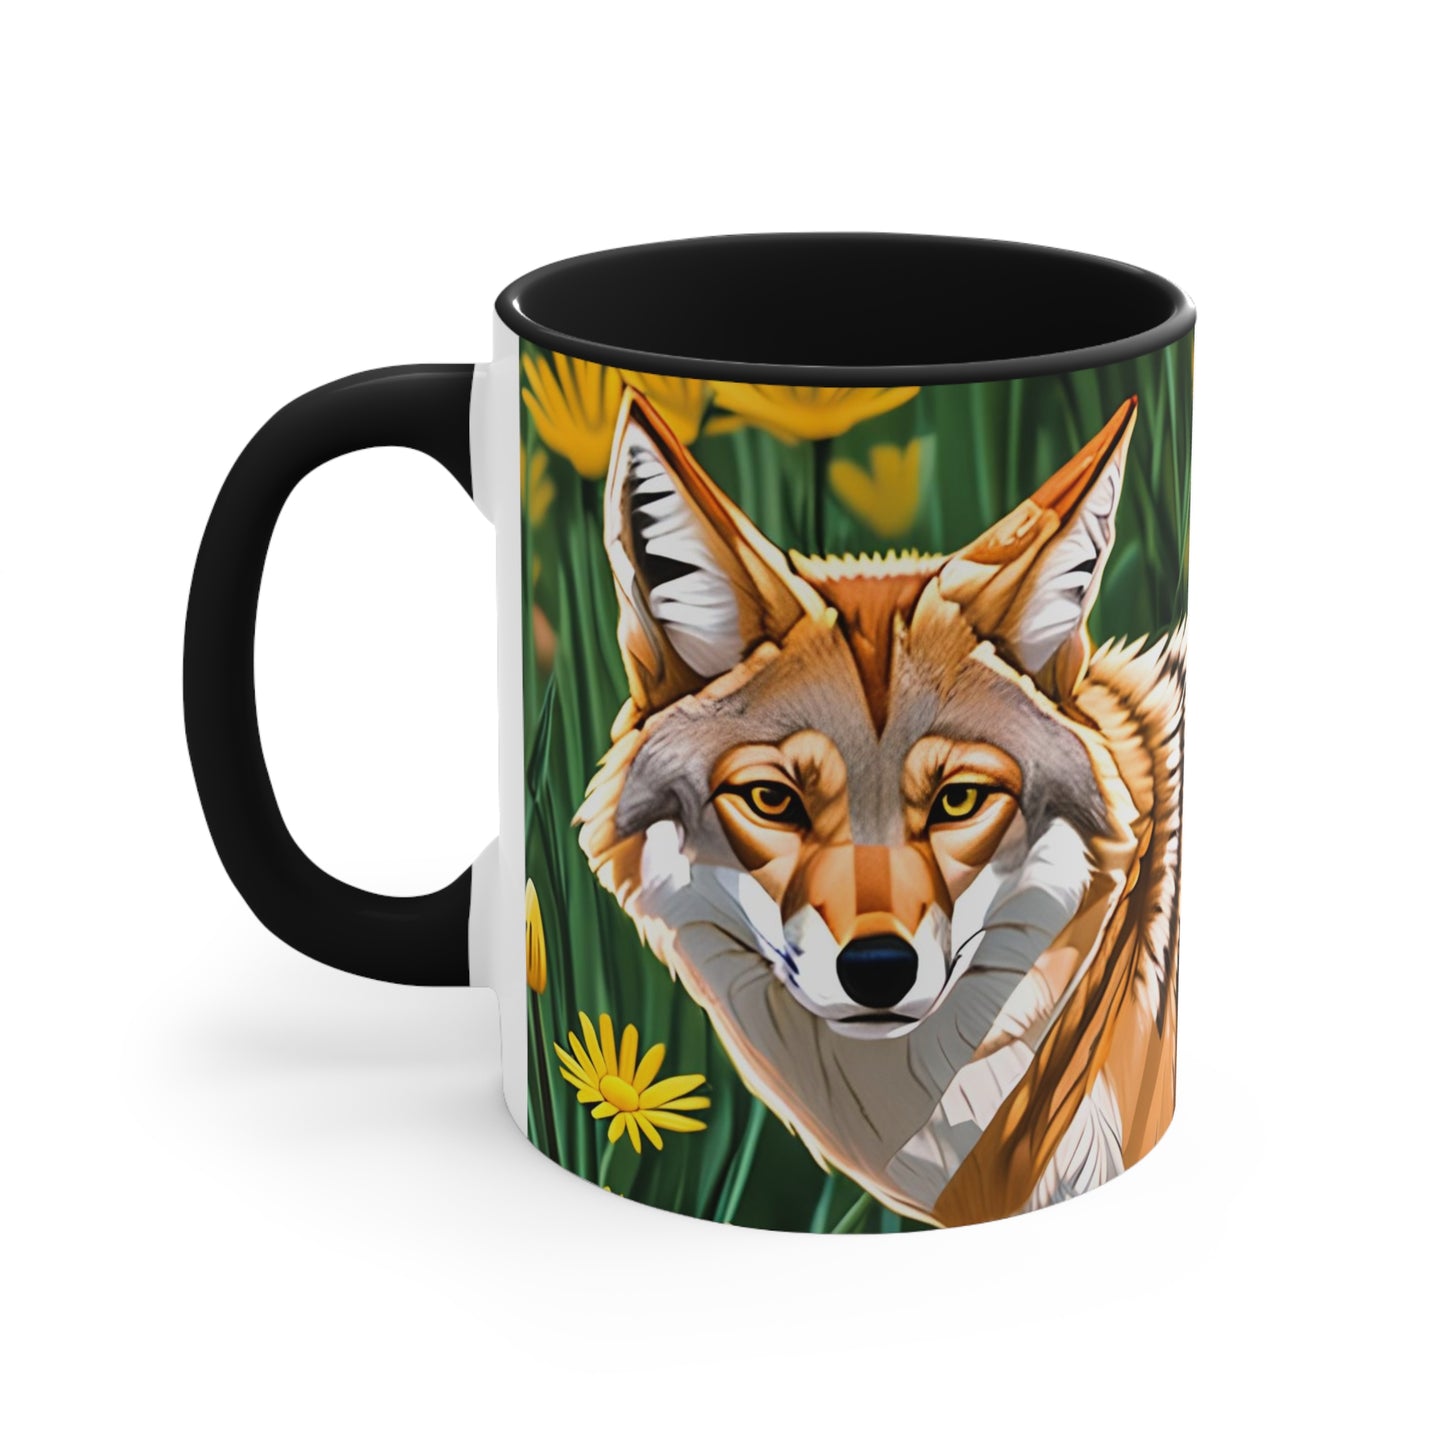 Coyote with Flowers, Ceramic Mug - Perfect for Coffee, Tea, and More!